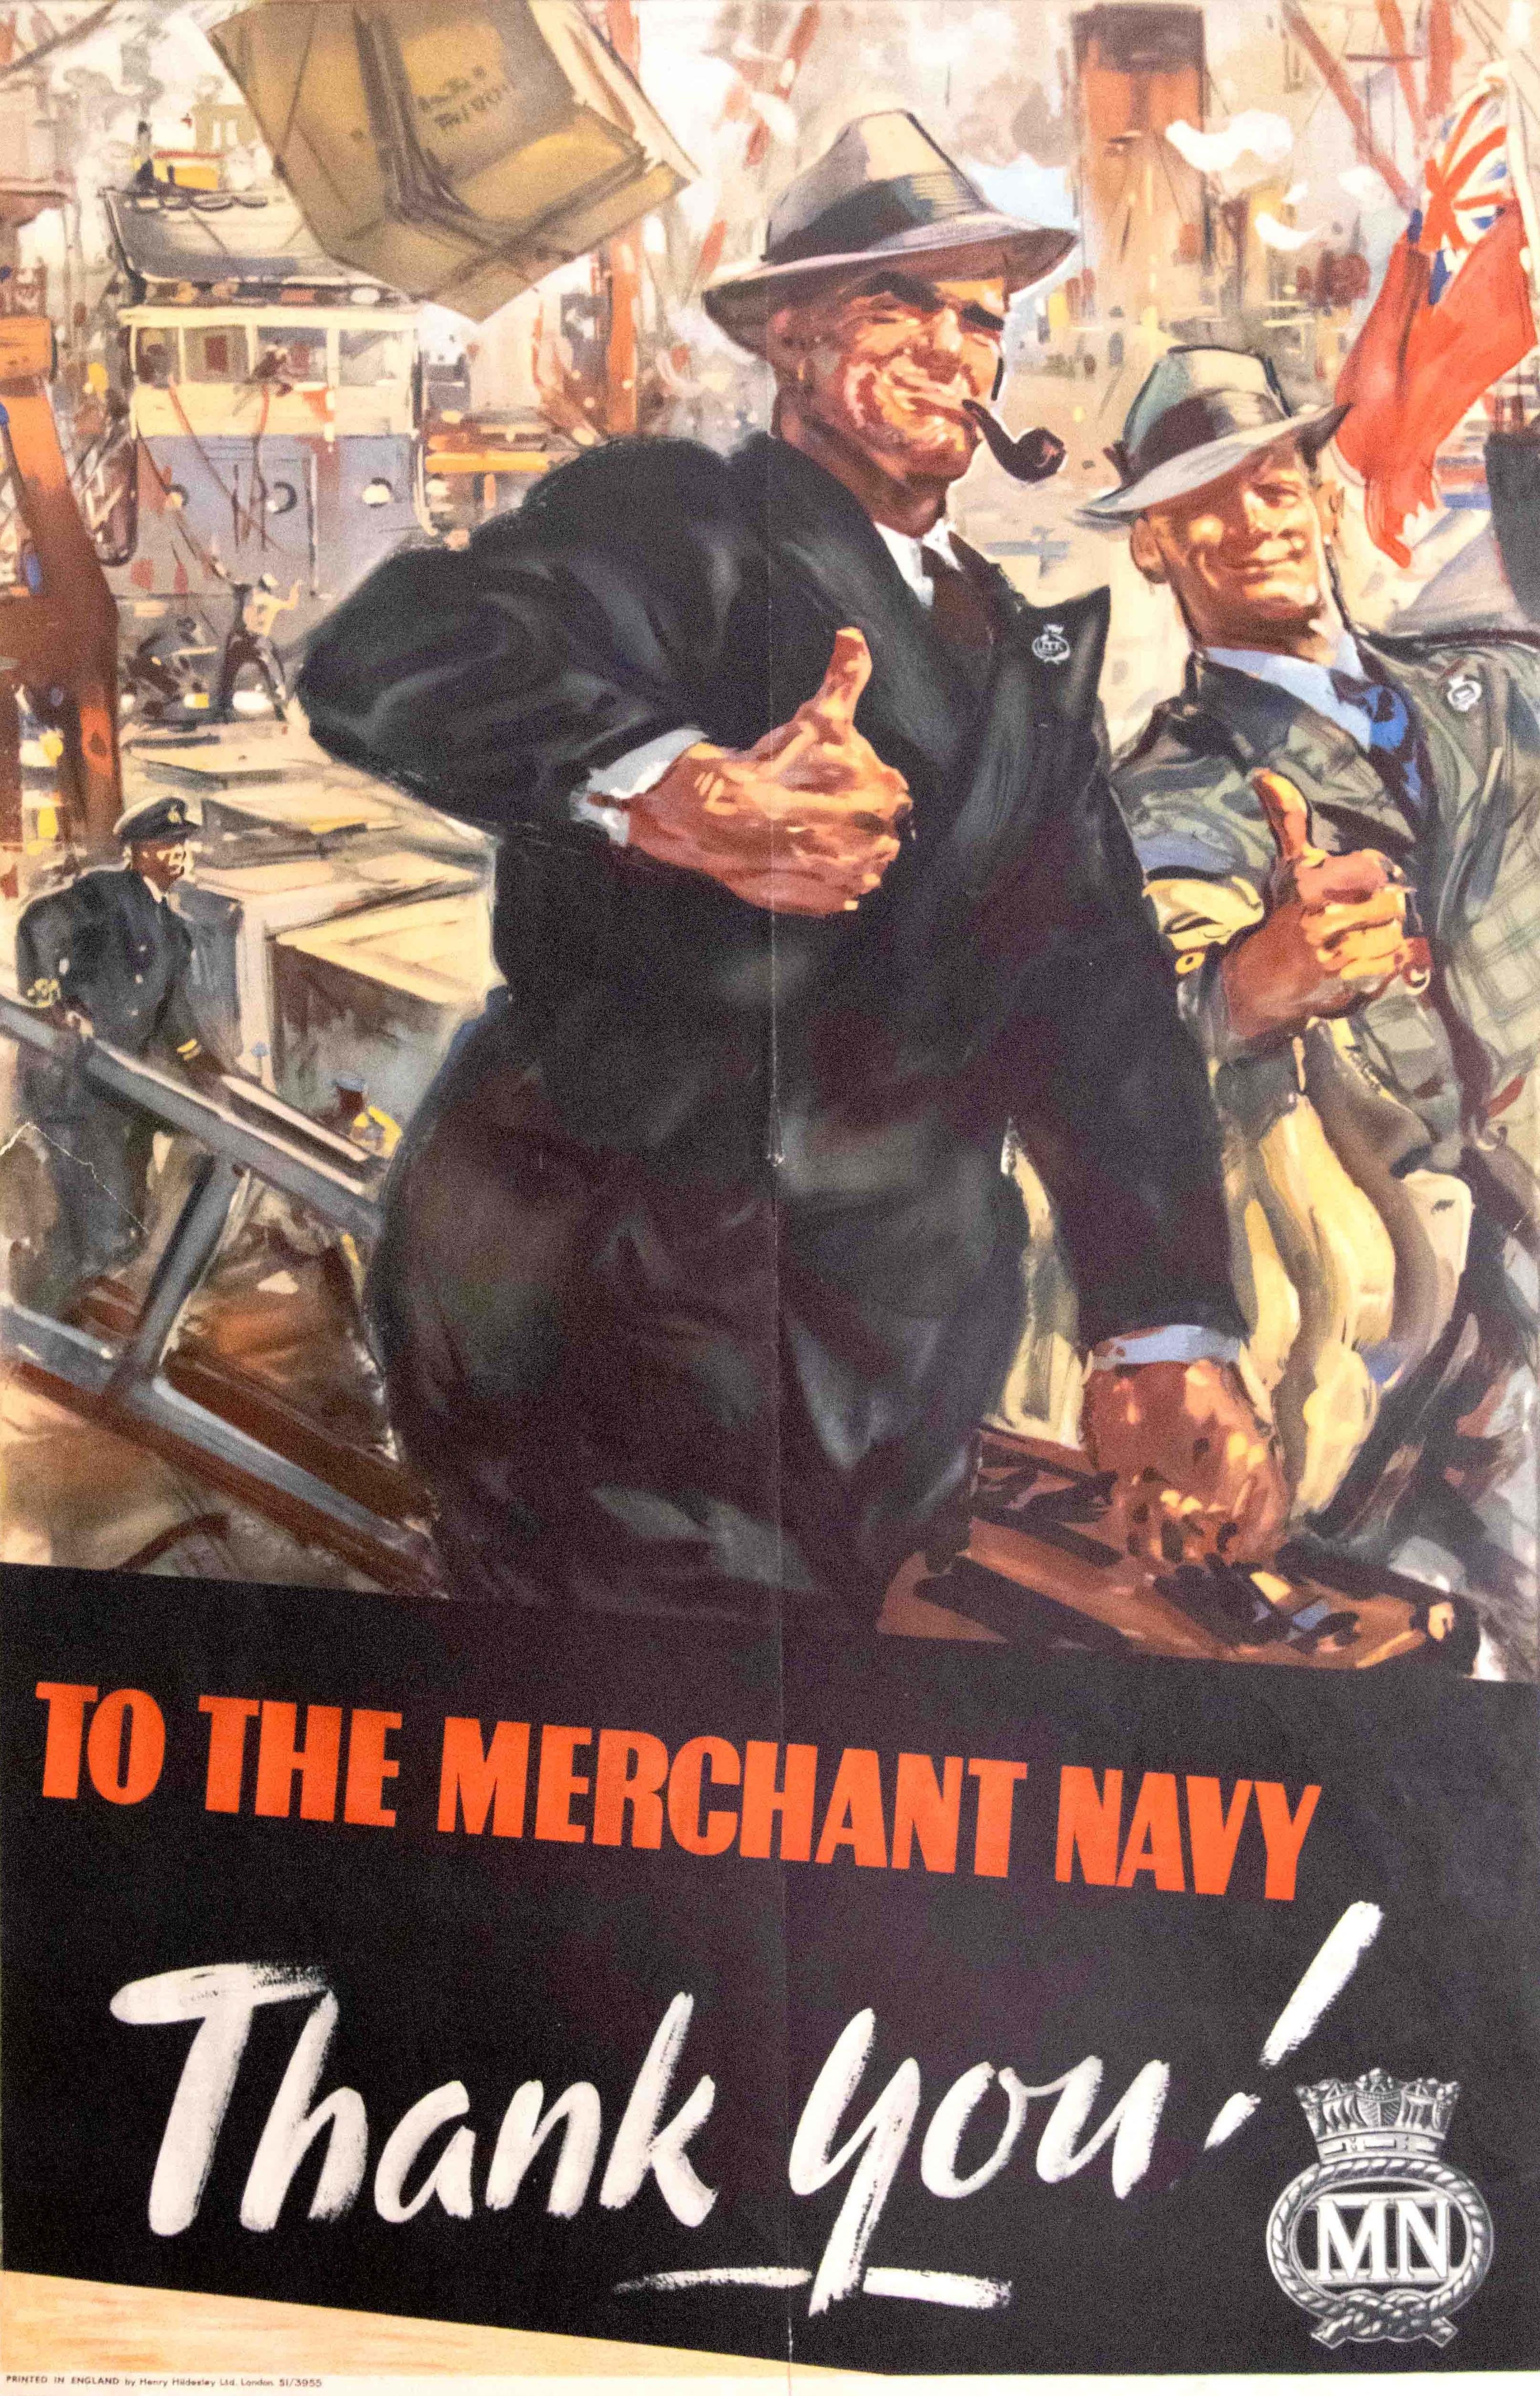 Unknown Print - Original Vintage Poster To The Merchant Navy Thank You WWII Thumbs Up Artwork